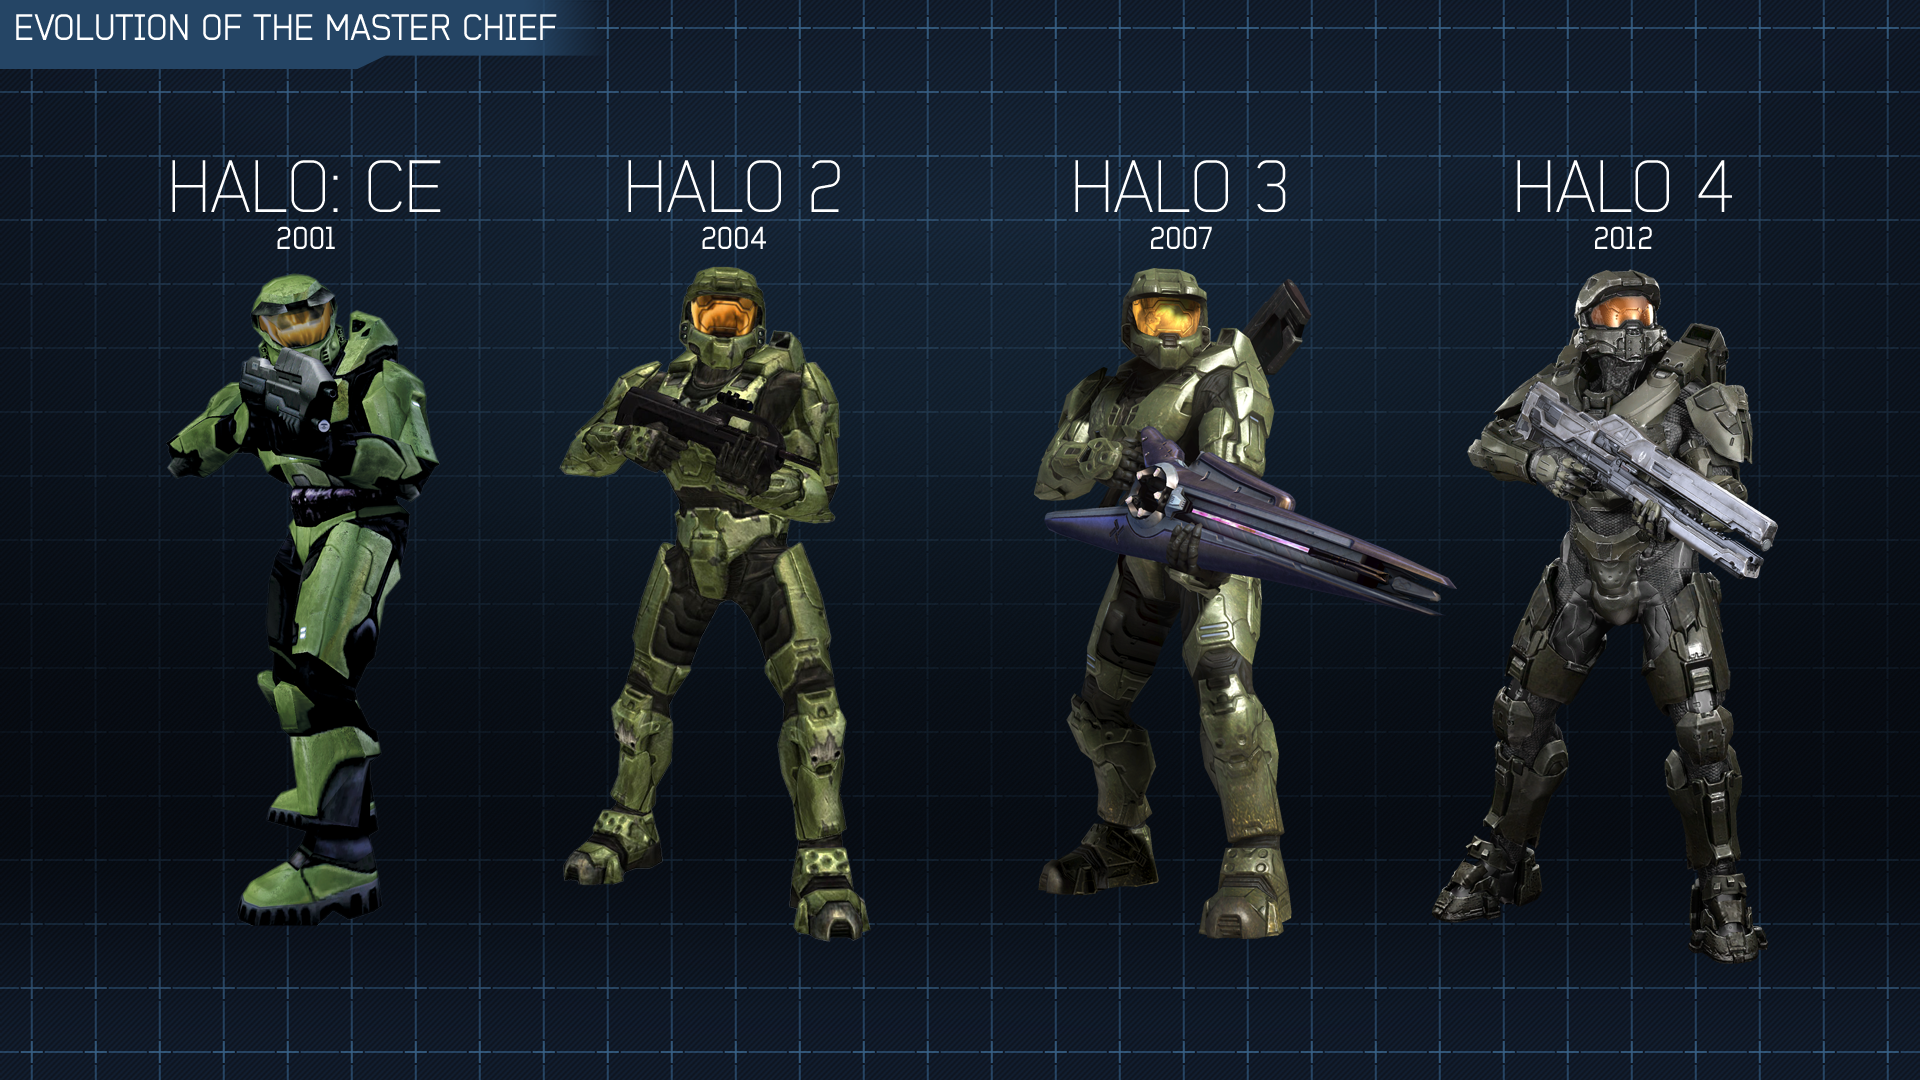 General 1920x1080 video games Halo (game) numbers science fiction video game art weapon Halo CE Halo 2 Halo 3 Halo 4 Master Chief (Halo) 2001 AD 2004 (Year) 2007 (Year) 2012 (Year) video game characters